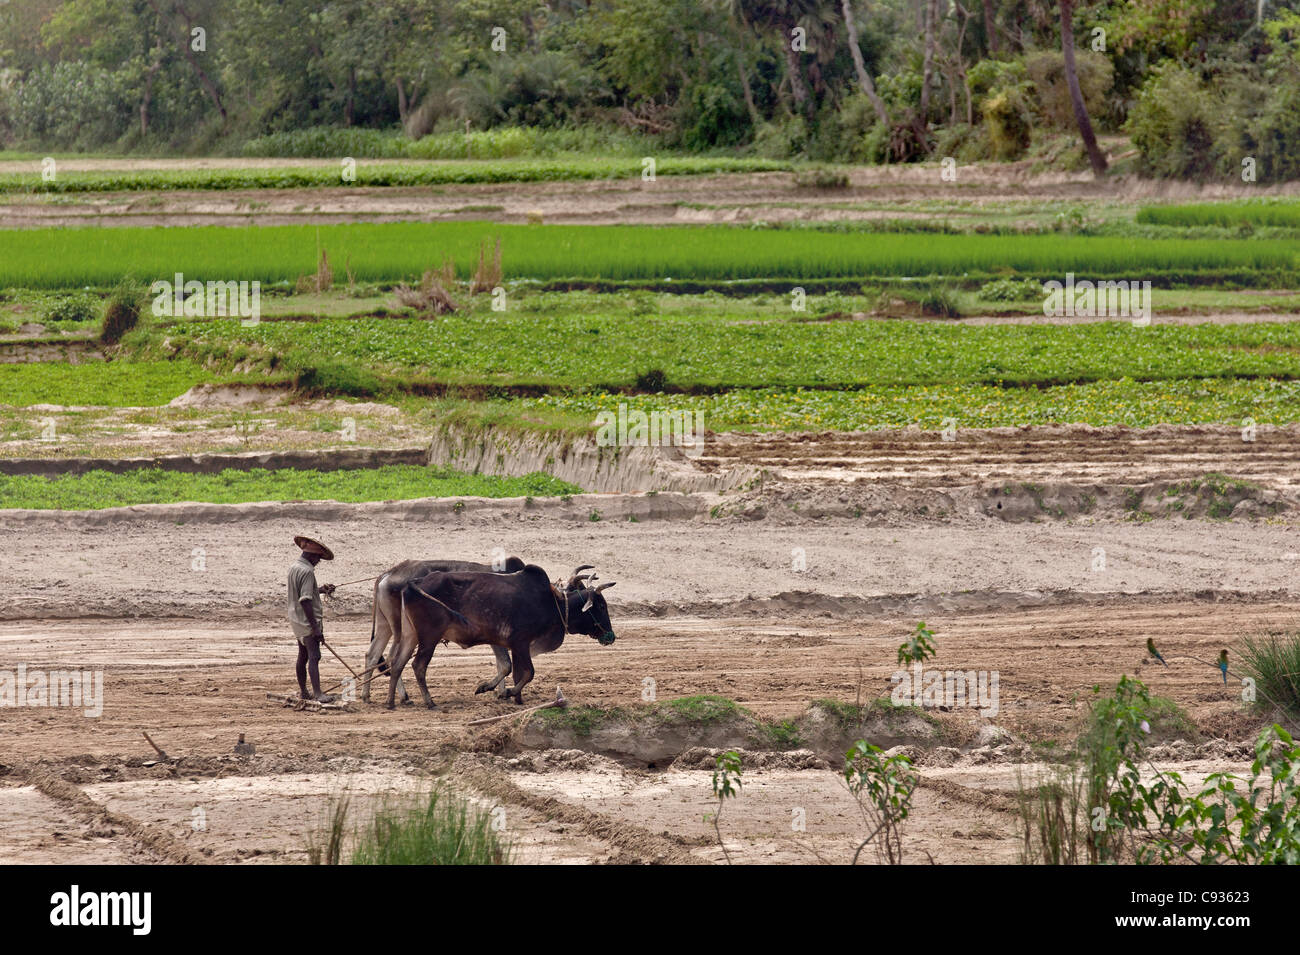 A farmer harrows his fields with oxen along the banks of the Hooghly River. Stock Photo